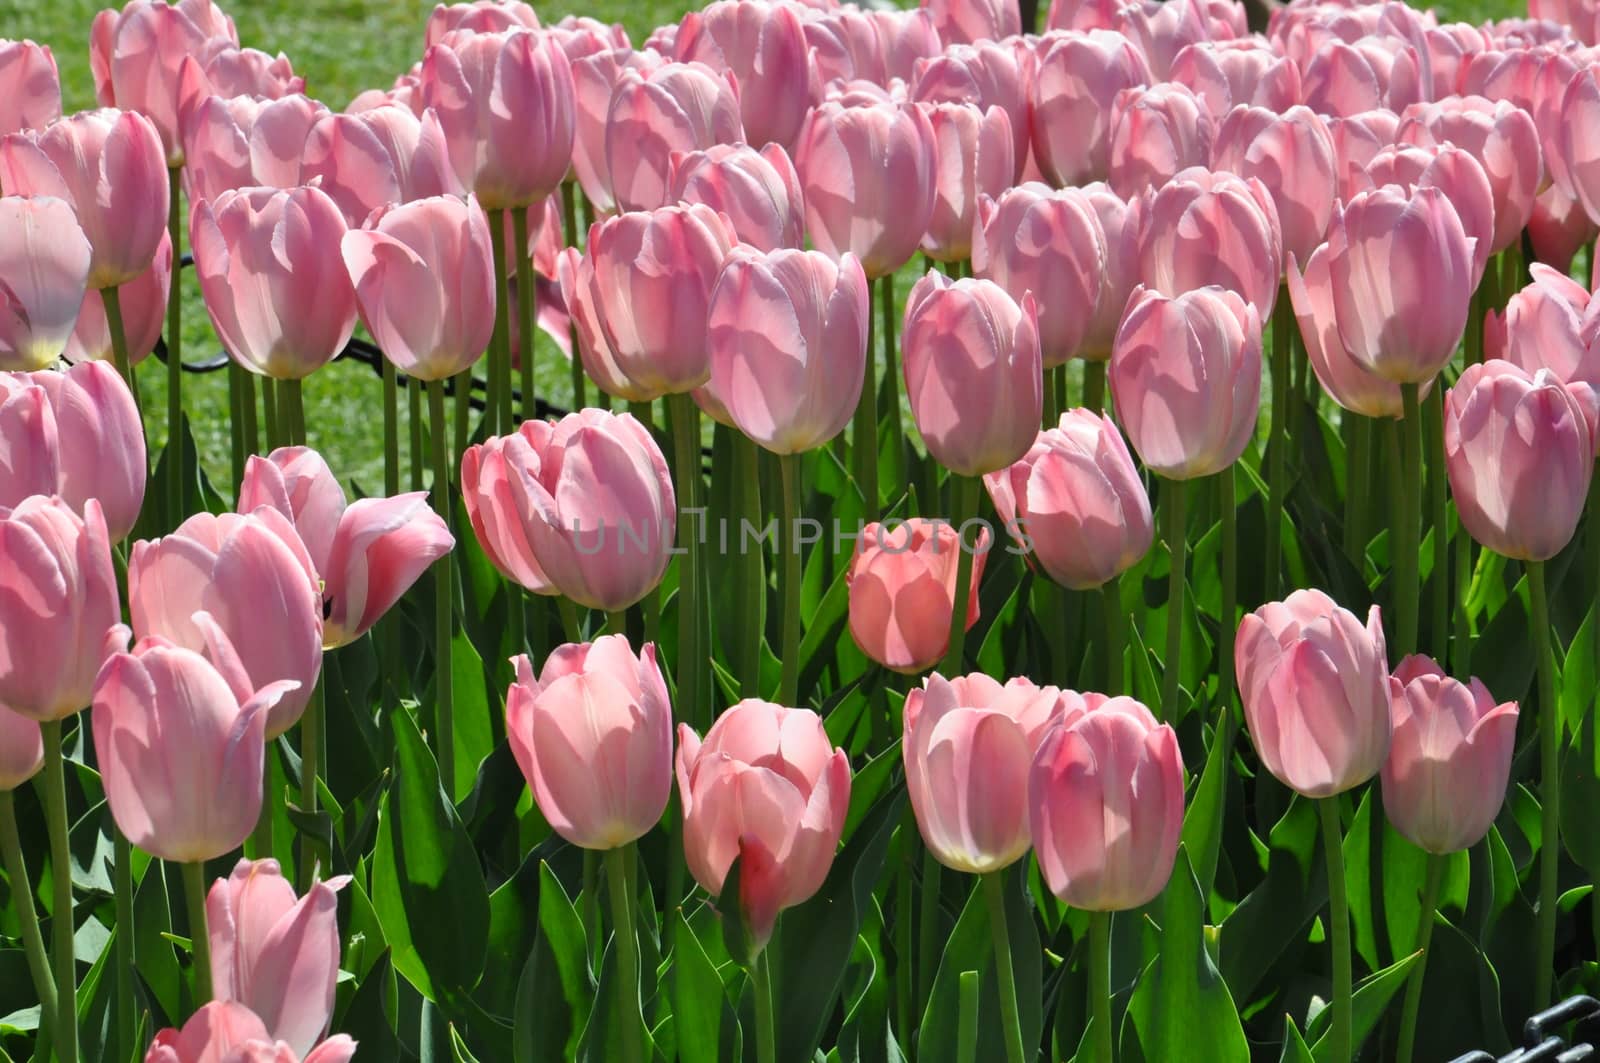 Colorful Tulips